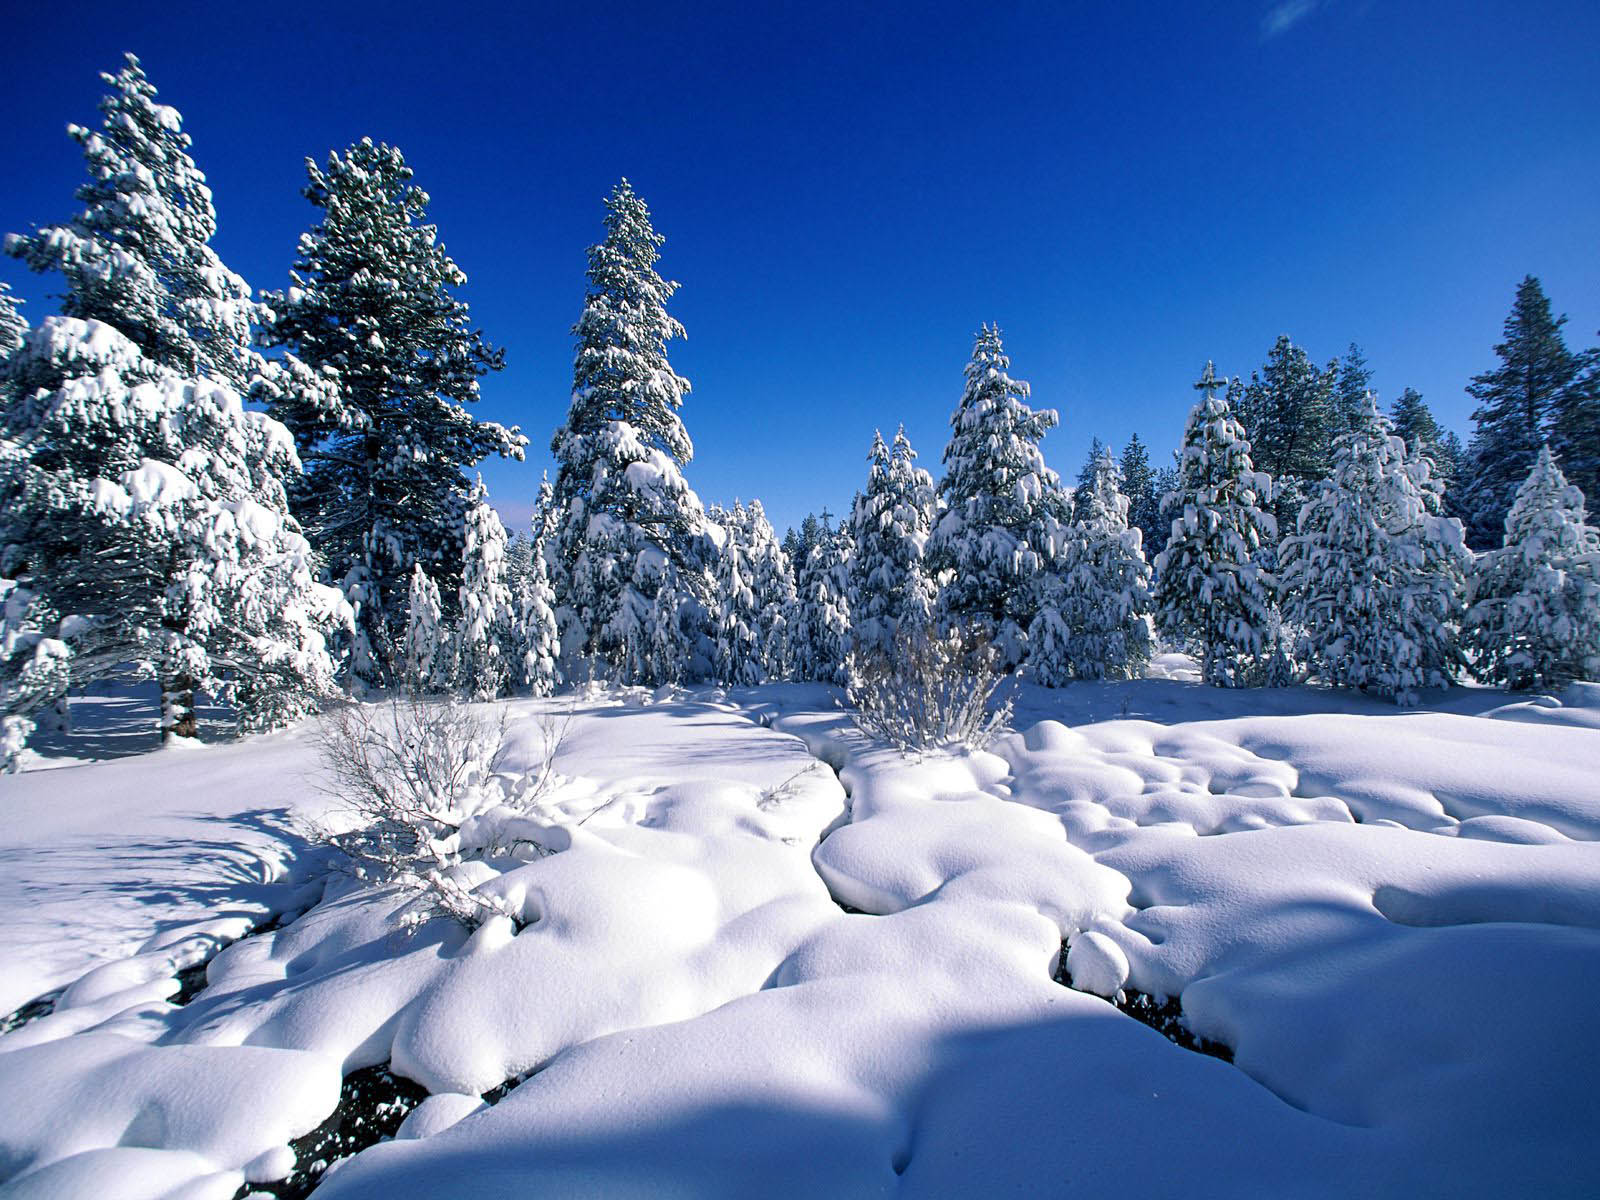 Tag Snow Wallpaper Background Photos Pictures And Image For